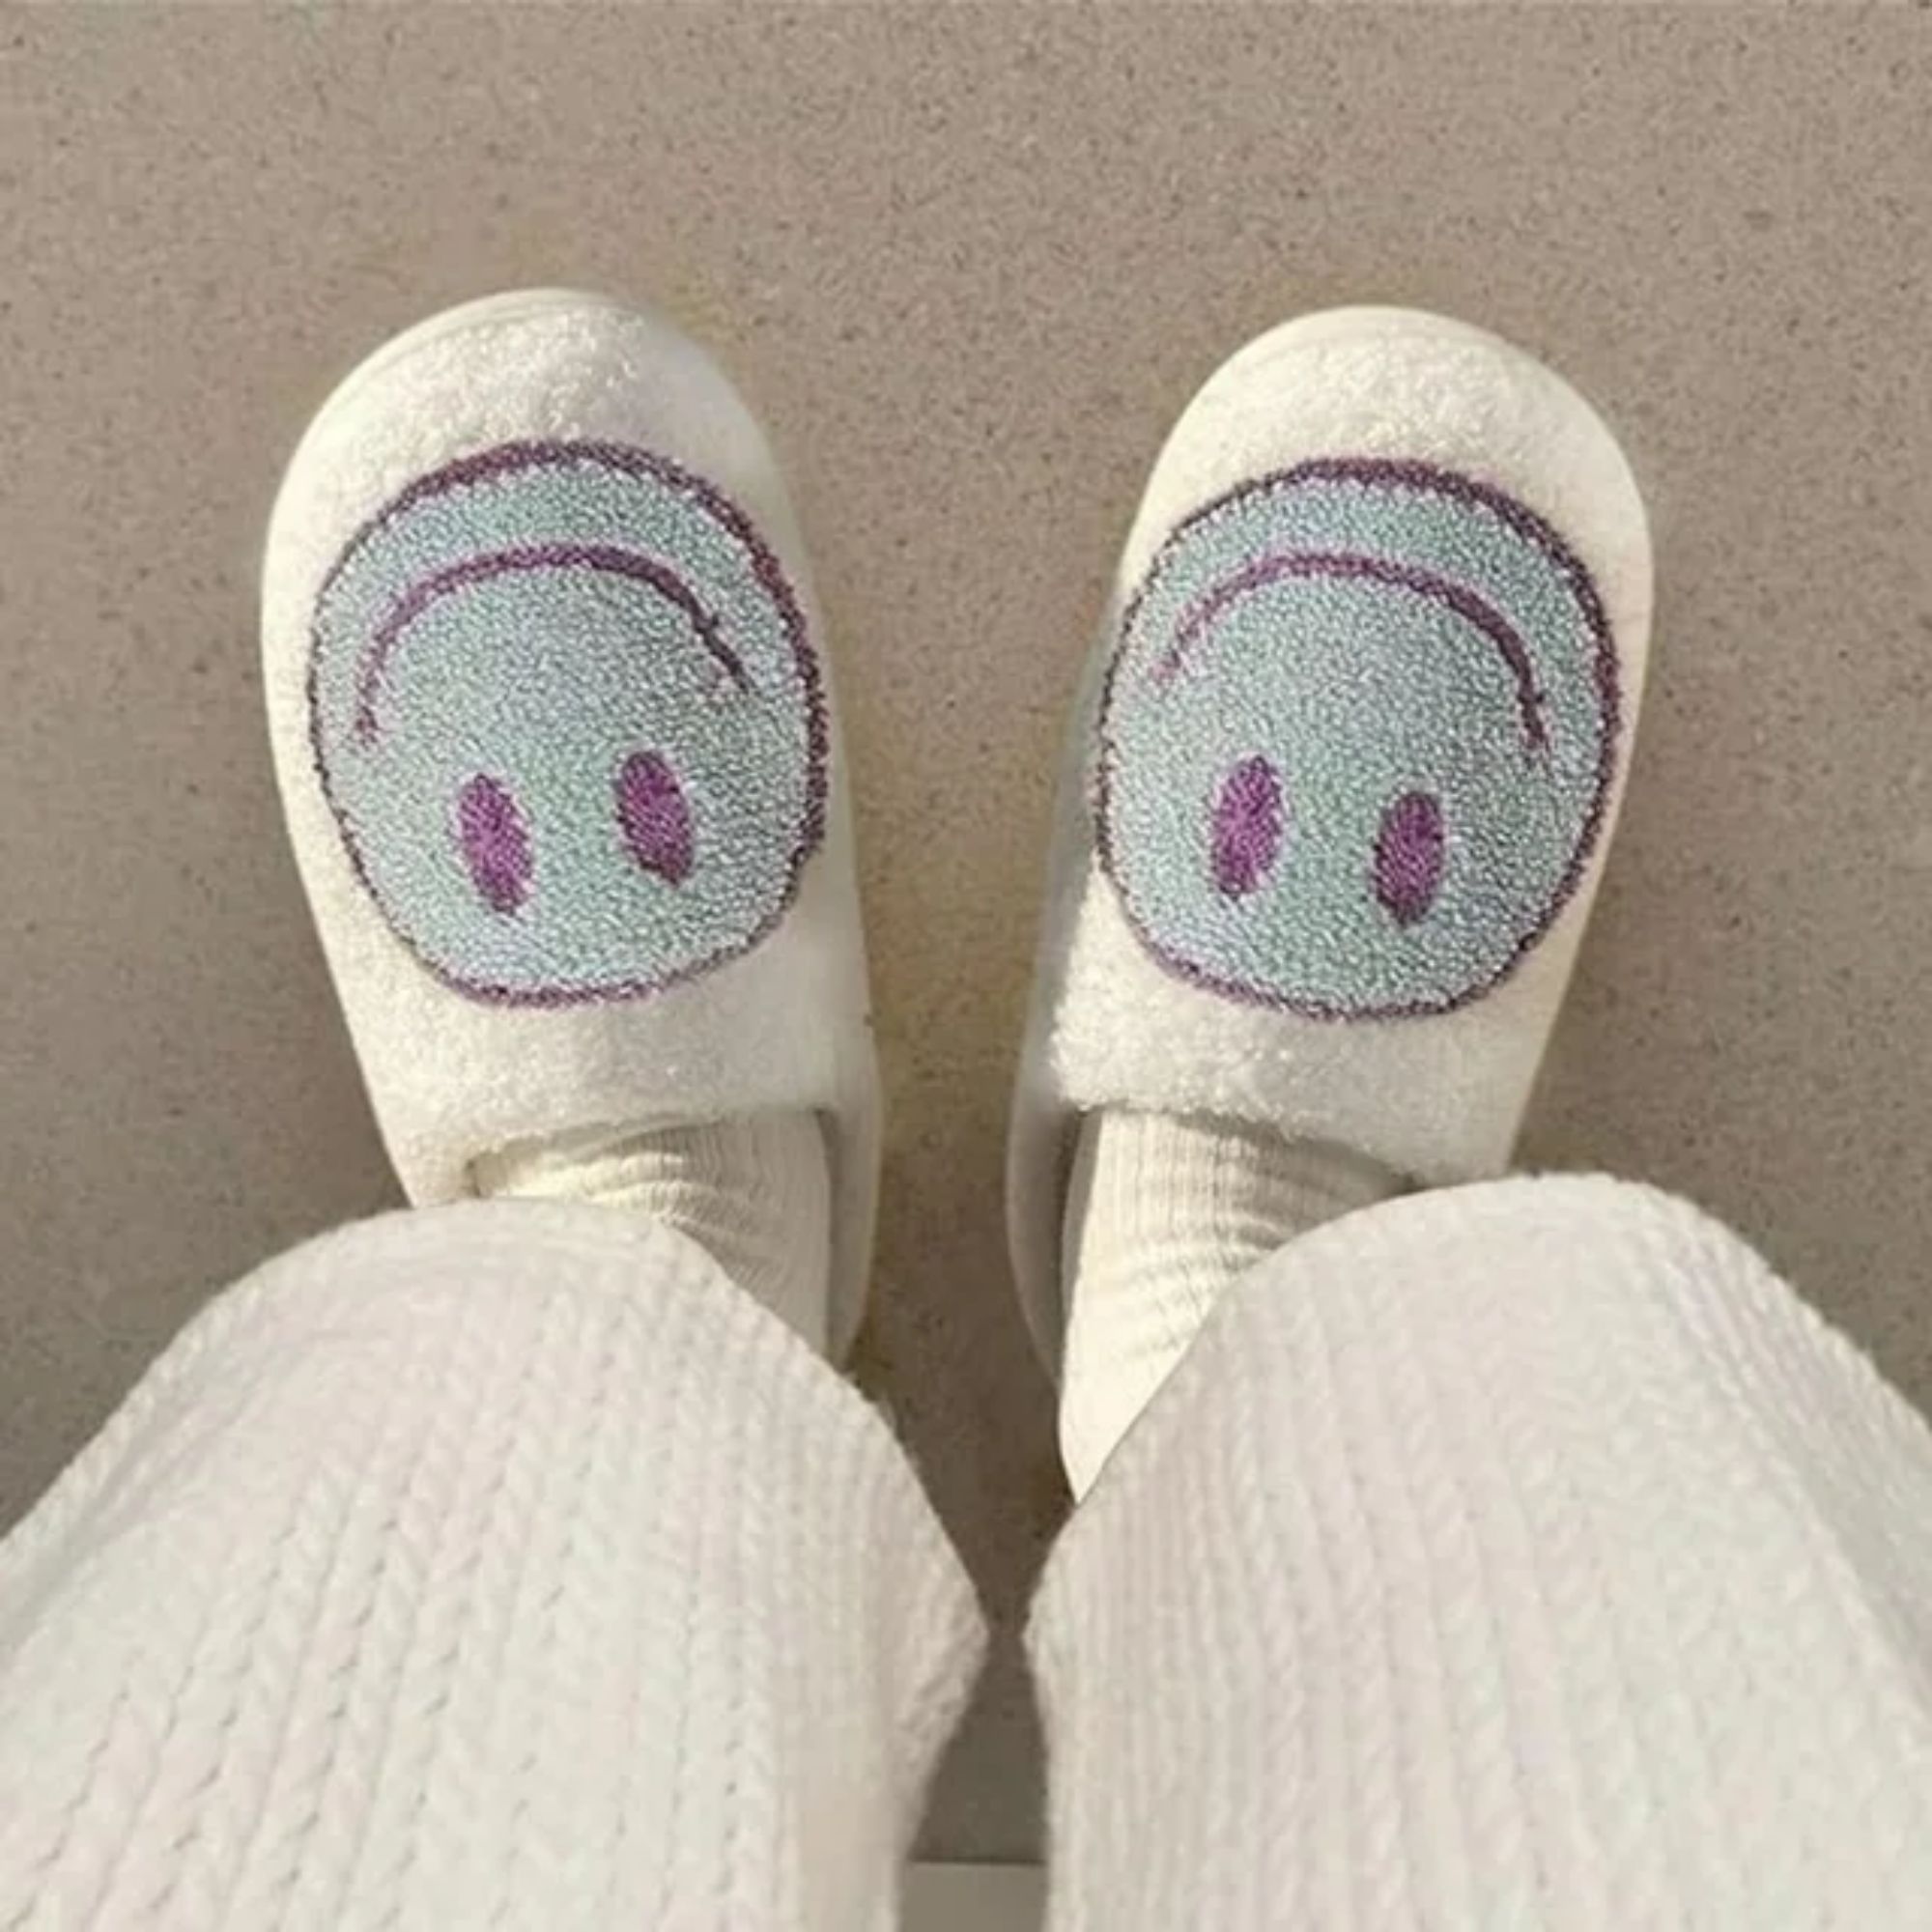 BERANMEY Cute Smile Face Slippers for Women Perfect Soft Plush Comfy Warm Slip-On Happy Face Slippers fo Women Indoor fluffy Smile House Slippers for Women and Men Non-slip Fuzzy Flat Slides - image 5 of 8